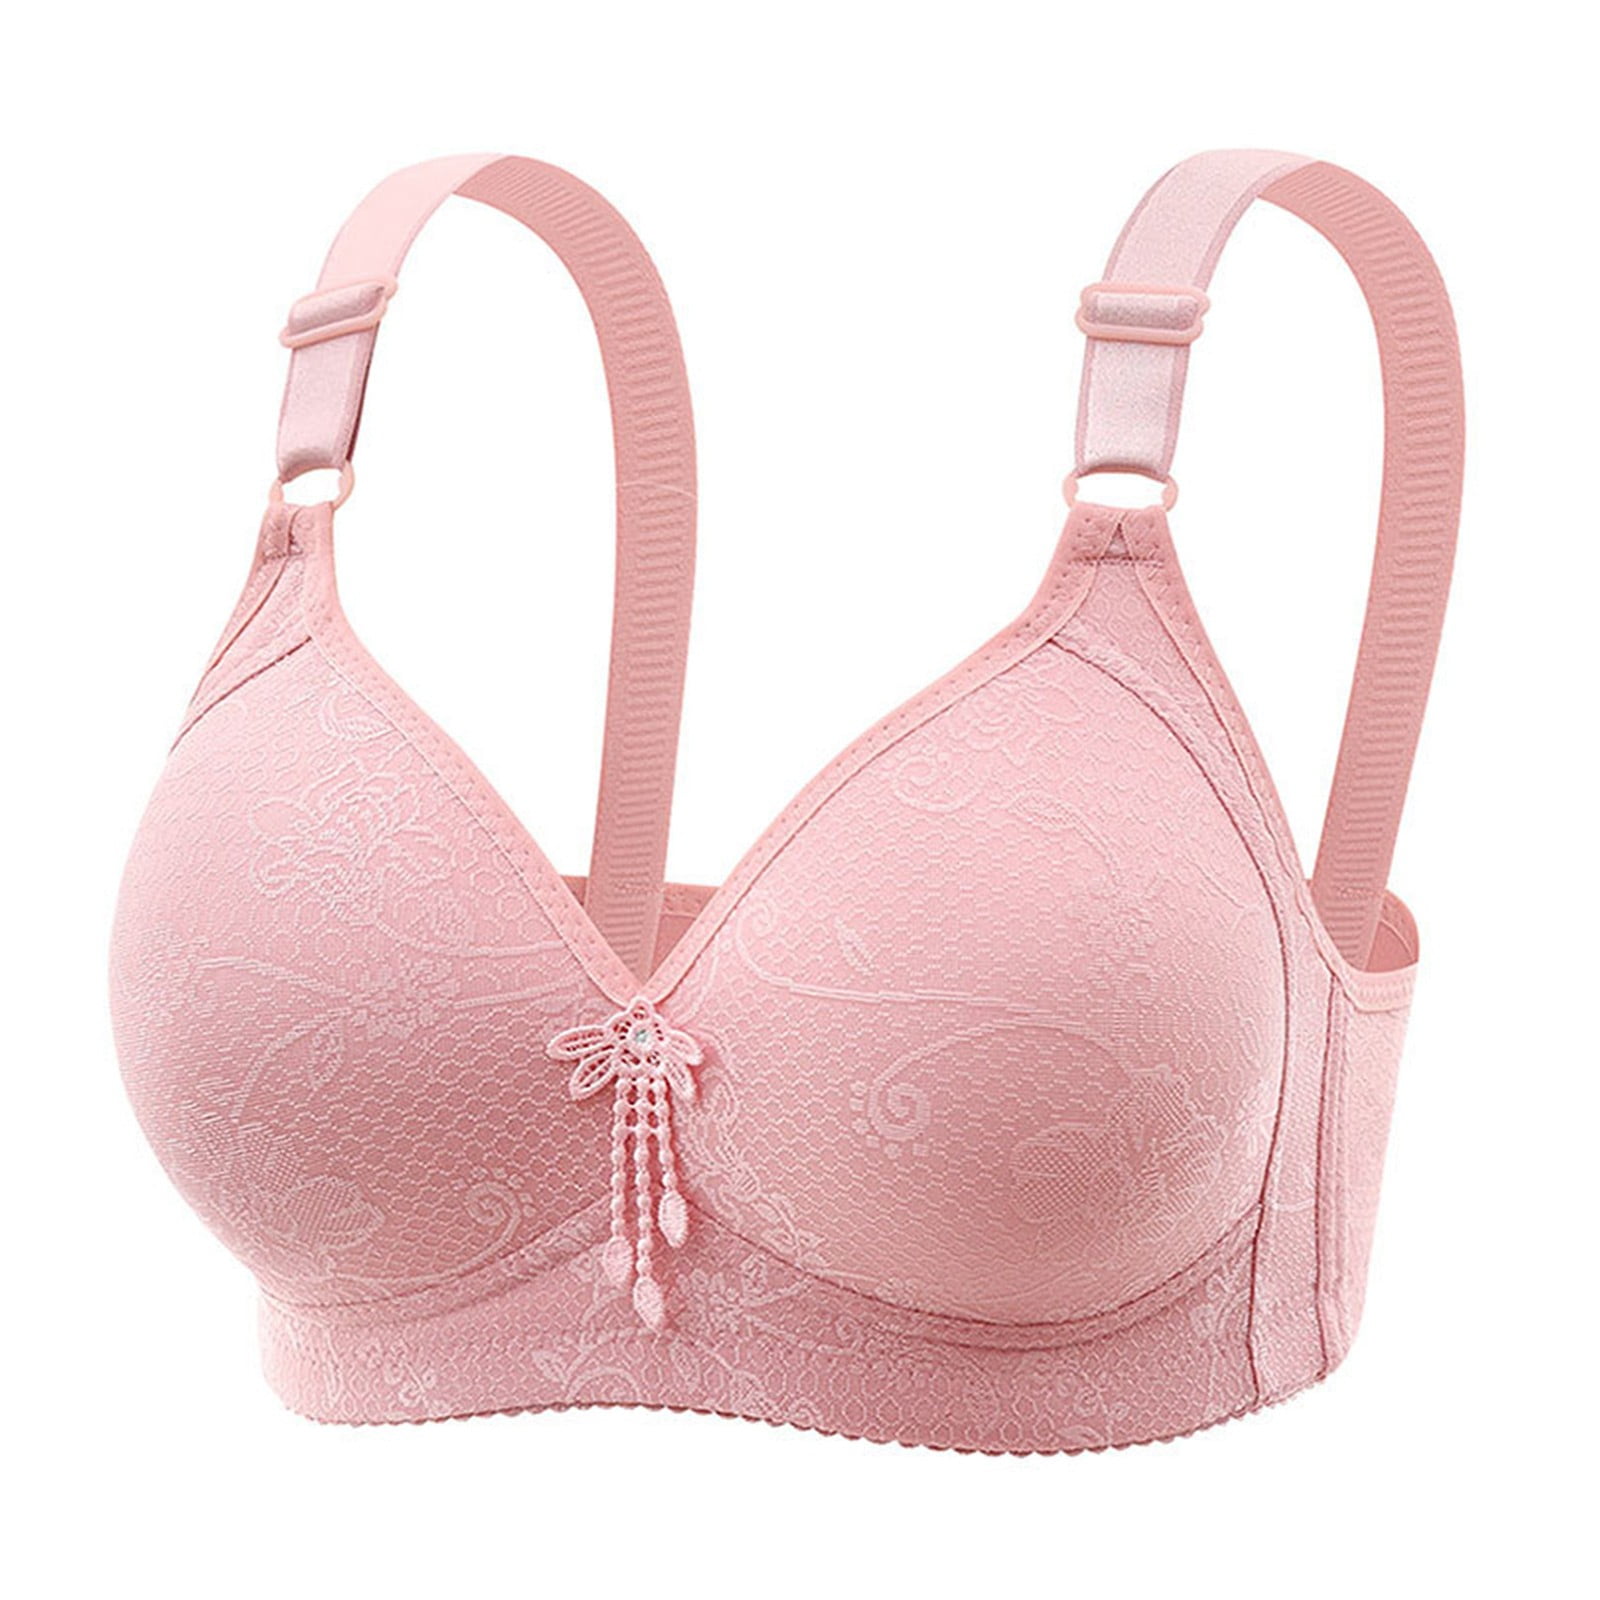 HAPIMO 3pcs Everyday Bra for Women Open Front Ultra Light Lingerie Comfort  Daily Brassiere Underwear Pink S